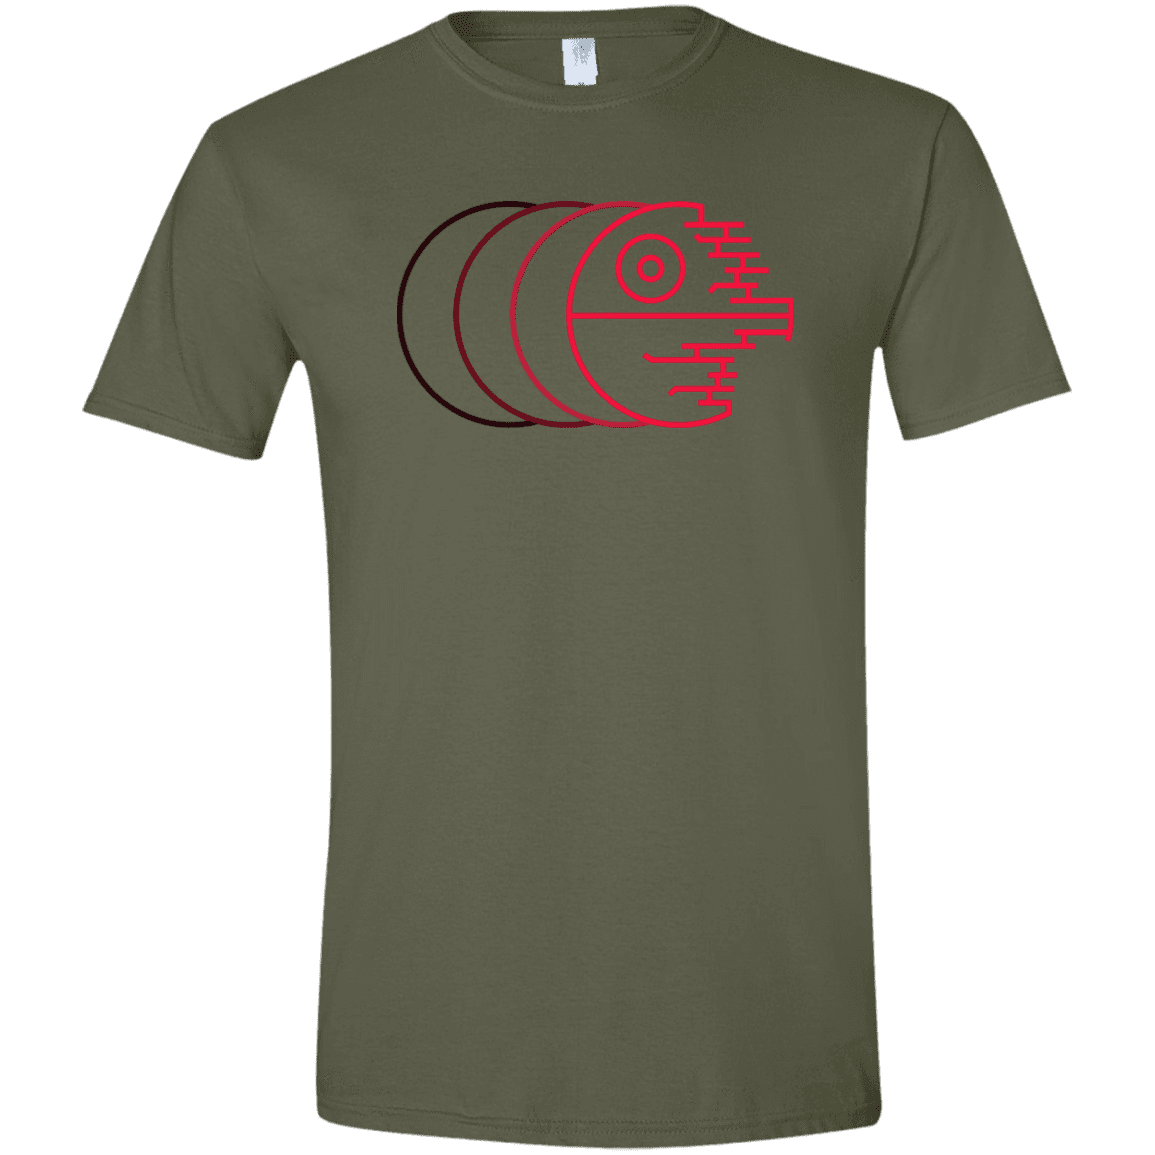 T-Shirts Military Green / S Fully Operational Men's Semi-Fitted Softstyle